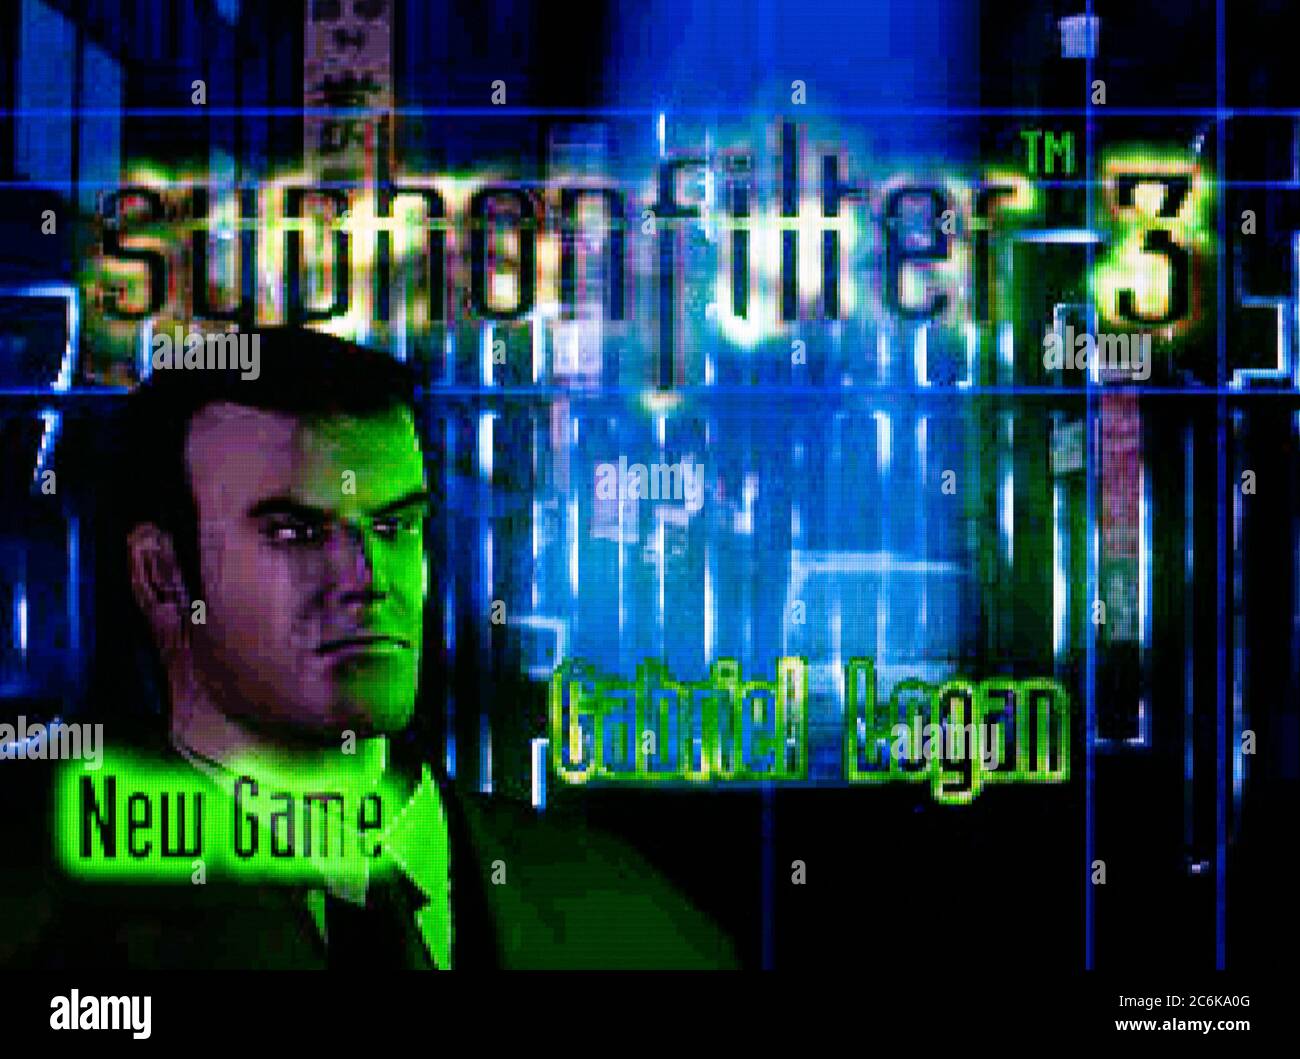 How long is Syphon Filter 3?